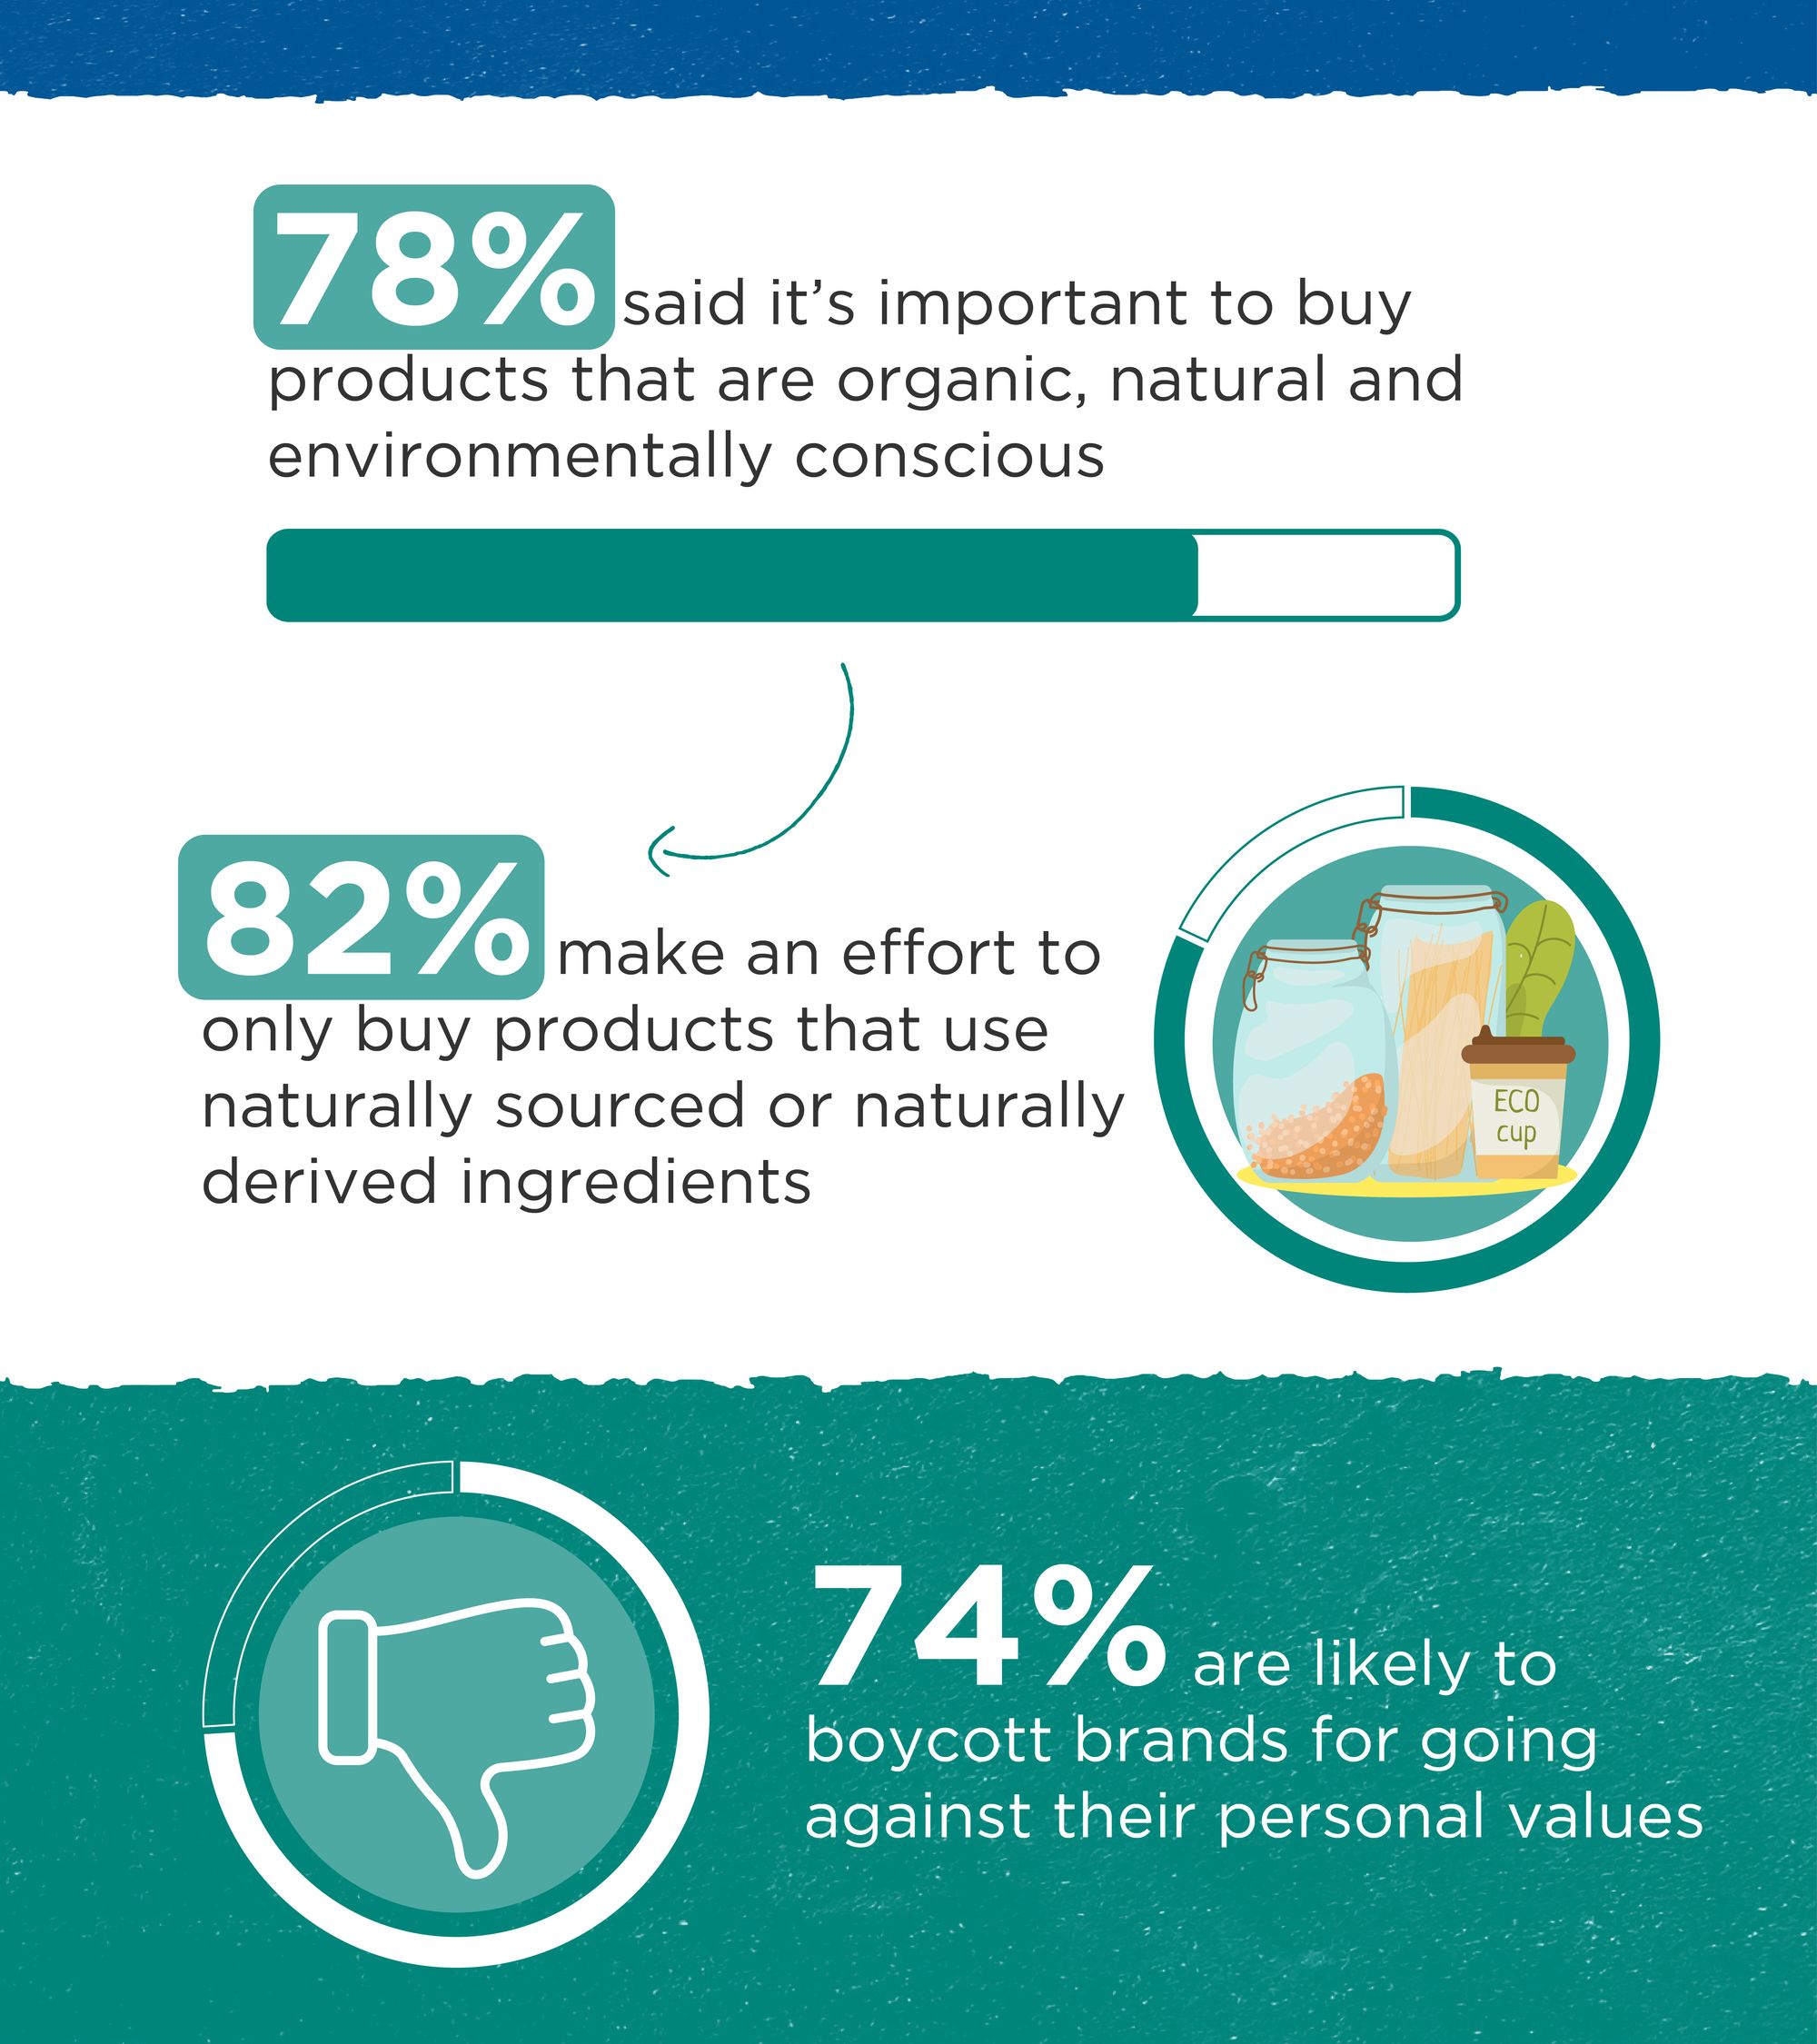 Graphic showing the following stats: 78% said it's important to buy products that are organic, natural and environmentally conscious; 82% make an effort to only buy products that use naturally sourced or naturally derived ingredients; 74% are likely to boycott brands for going against their personal values.